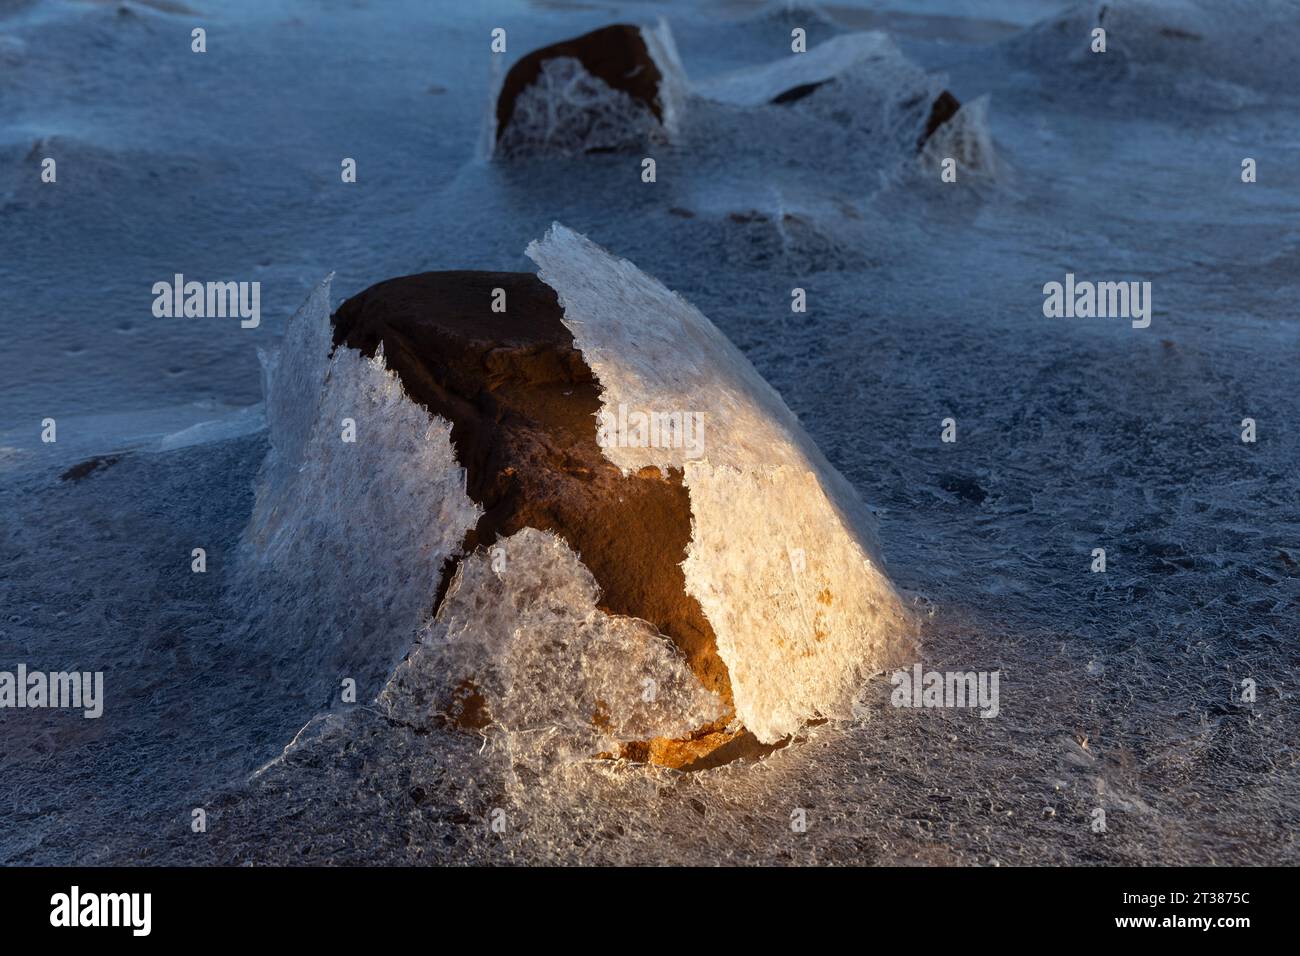 Ice covering river stone Stock Photo